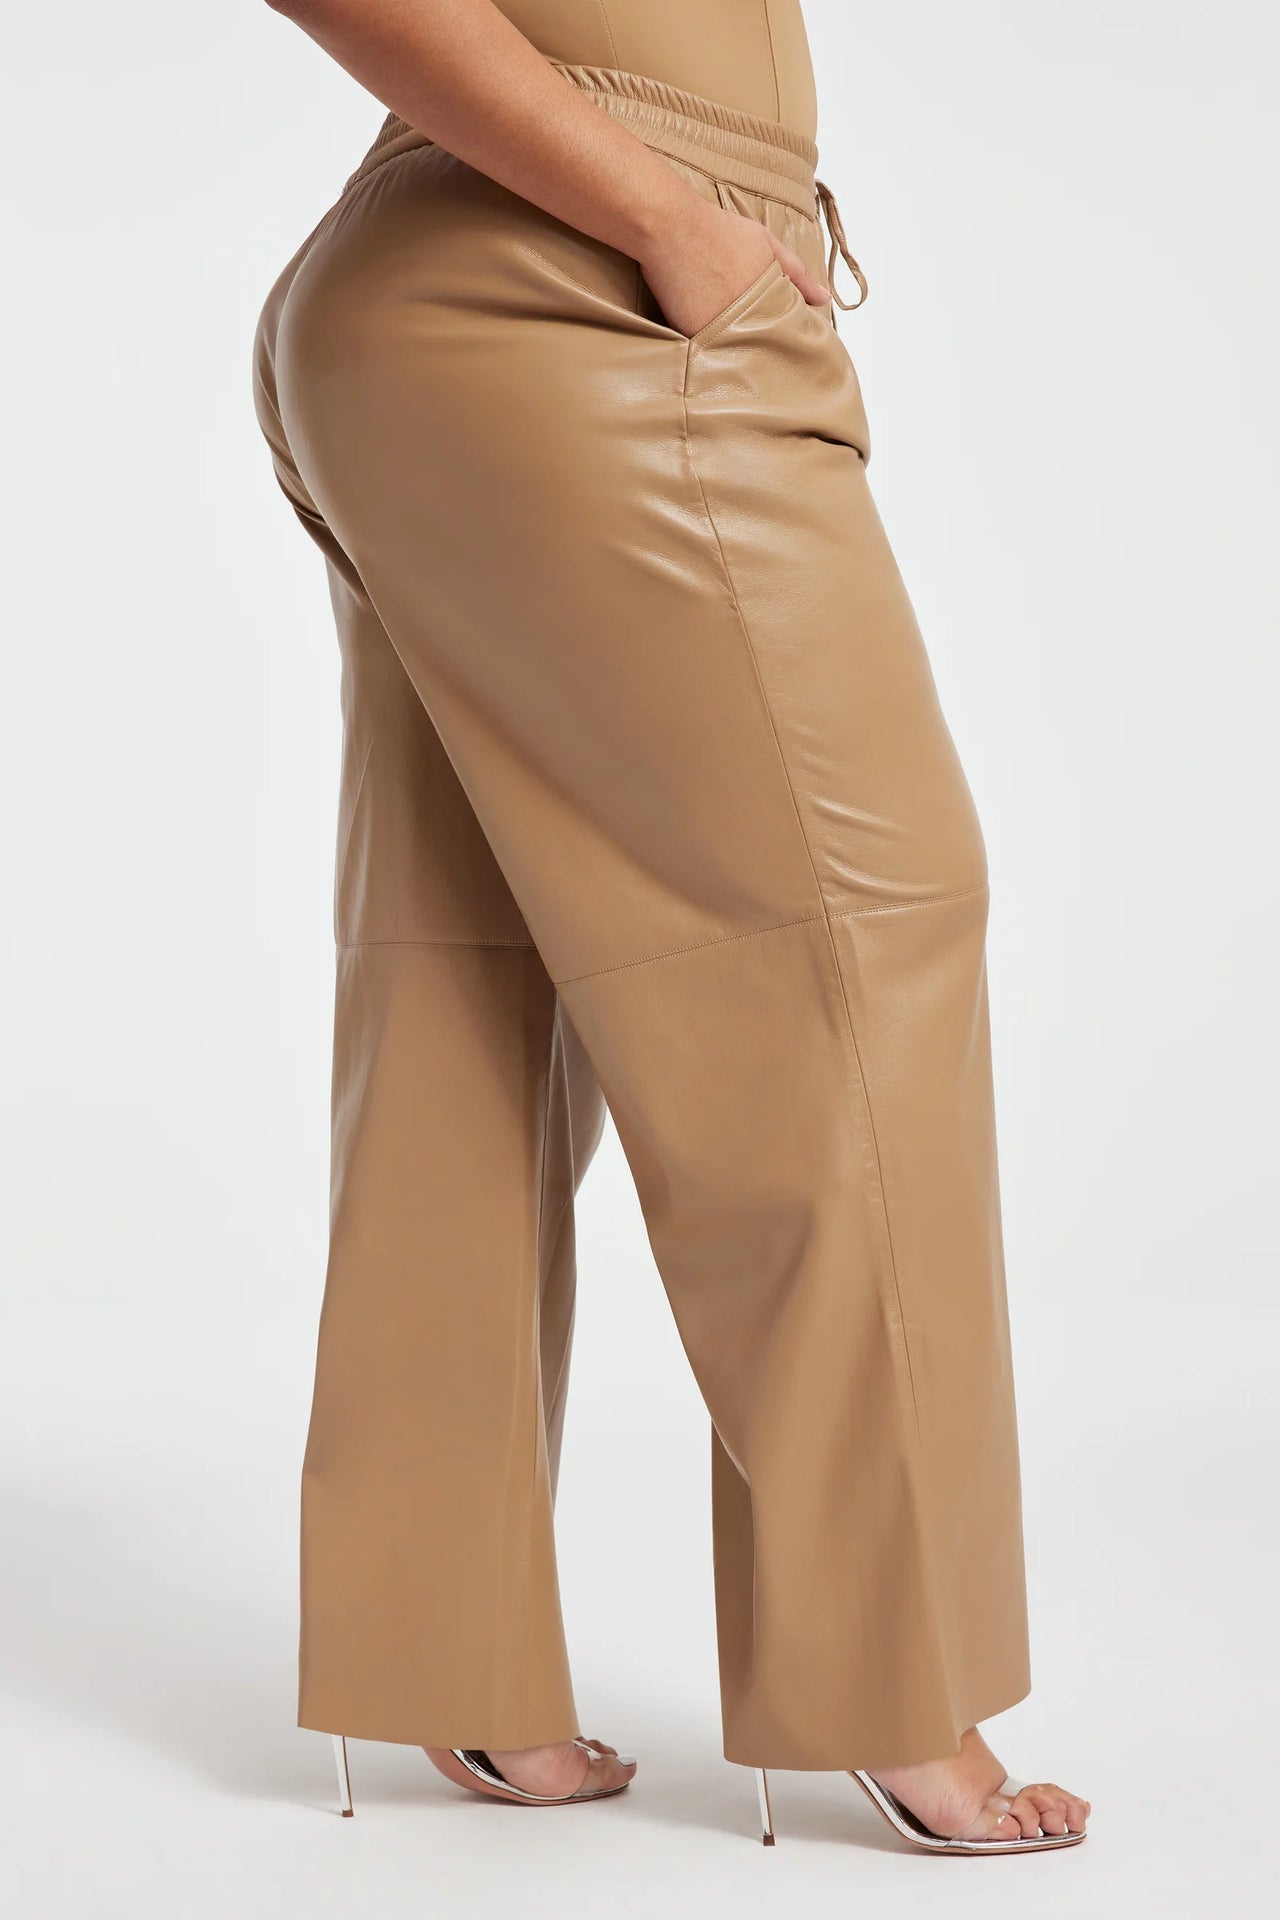 Hot Brown Wide Leg Leather Pant